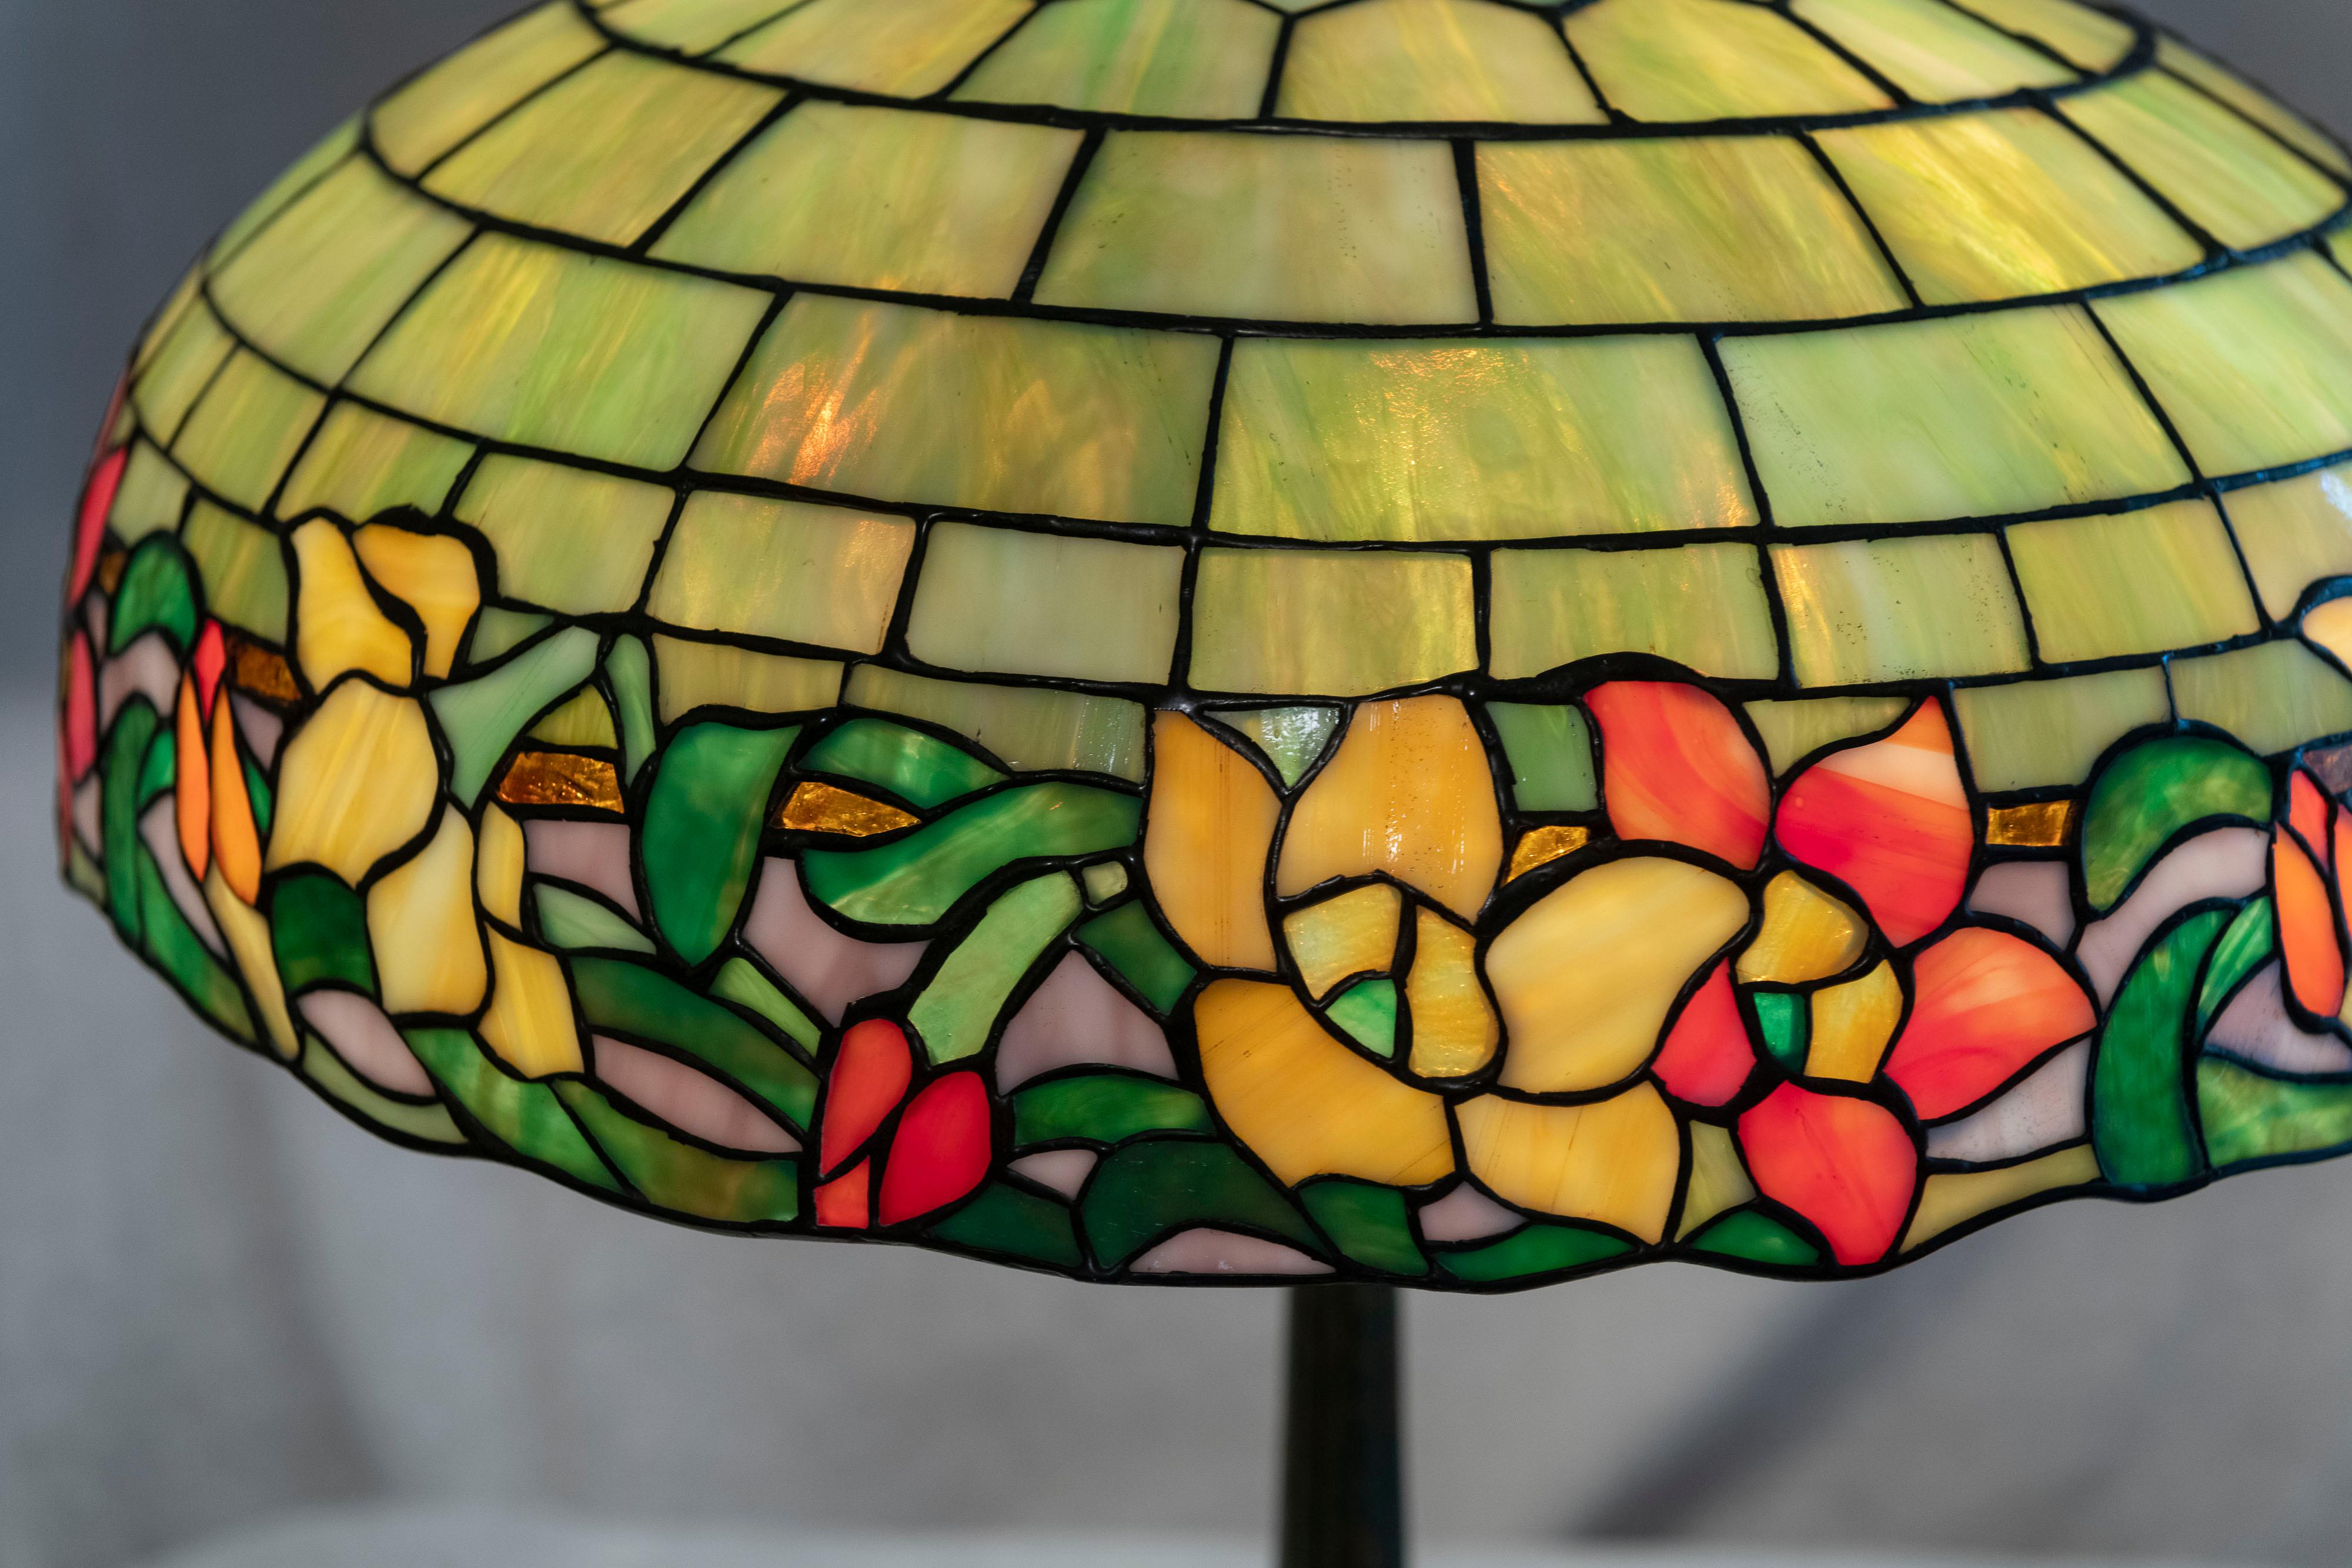 This colorful lamp made by Wilkinson as a graceful floral border of orange, green, yellow and purple tiles. The upper geometric brickwork design section is comprised of yellowish-green tiles. The handsome base is factory patinated in a rich dark